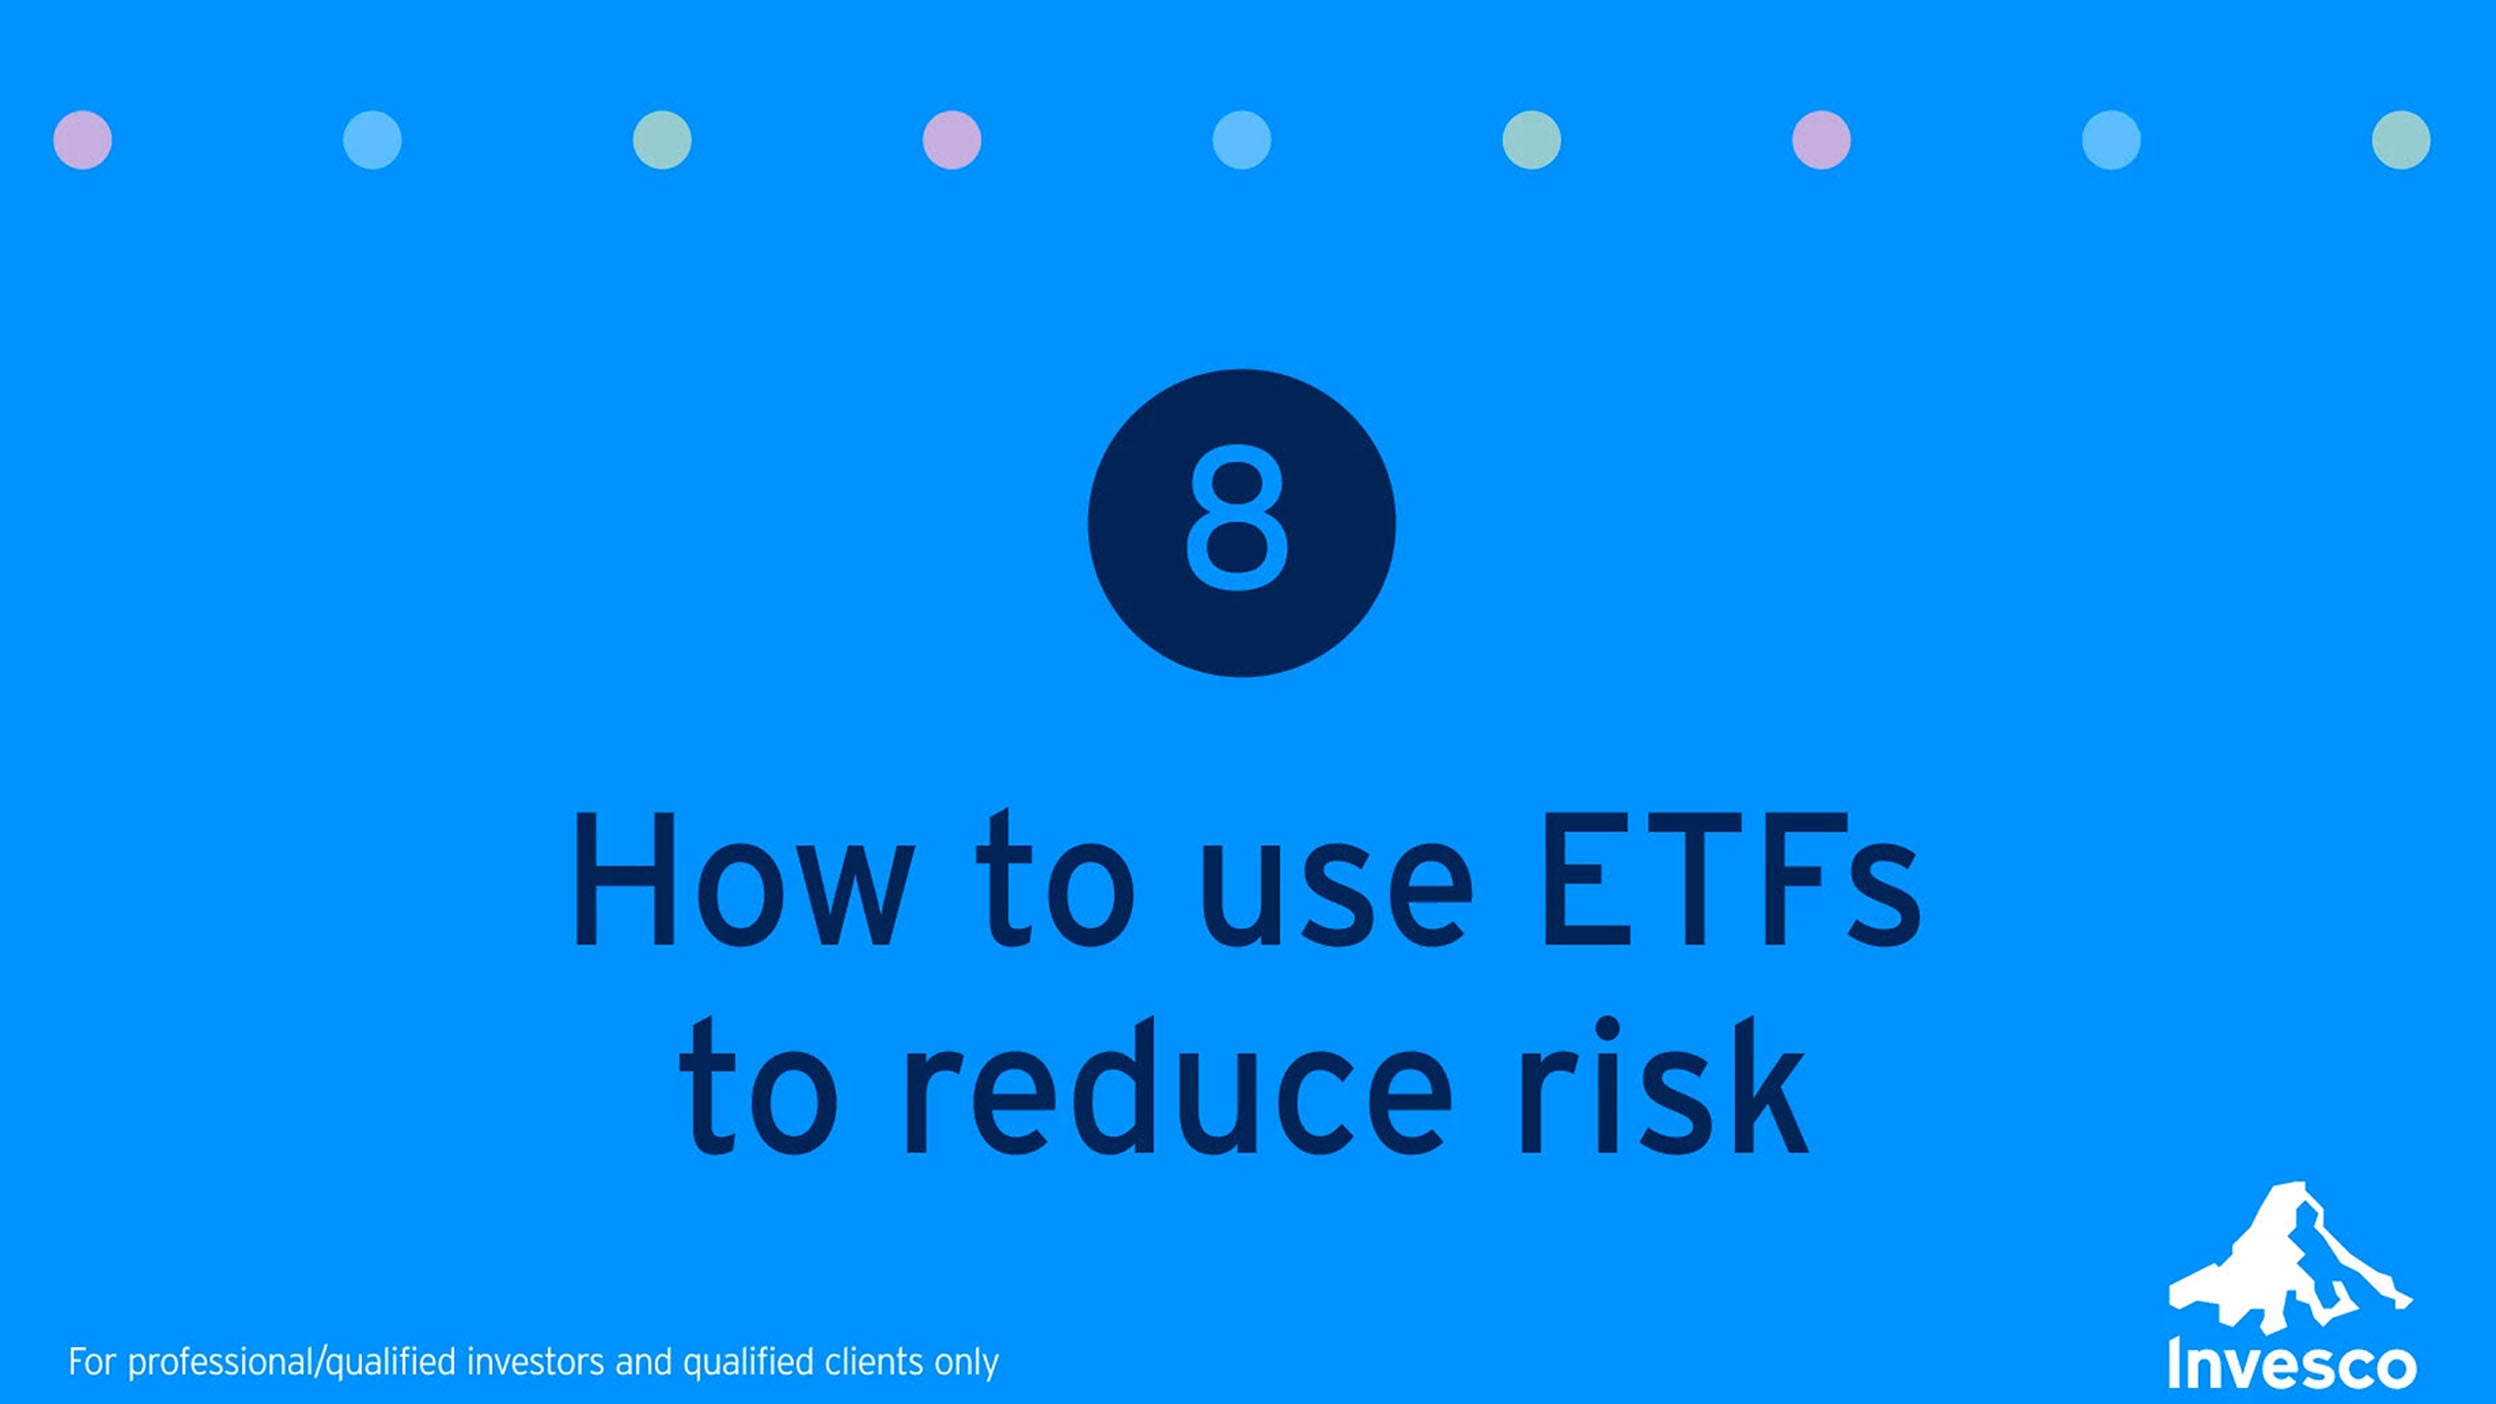 How to use ETFs to reduce risk